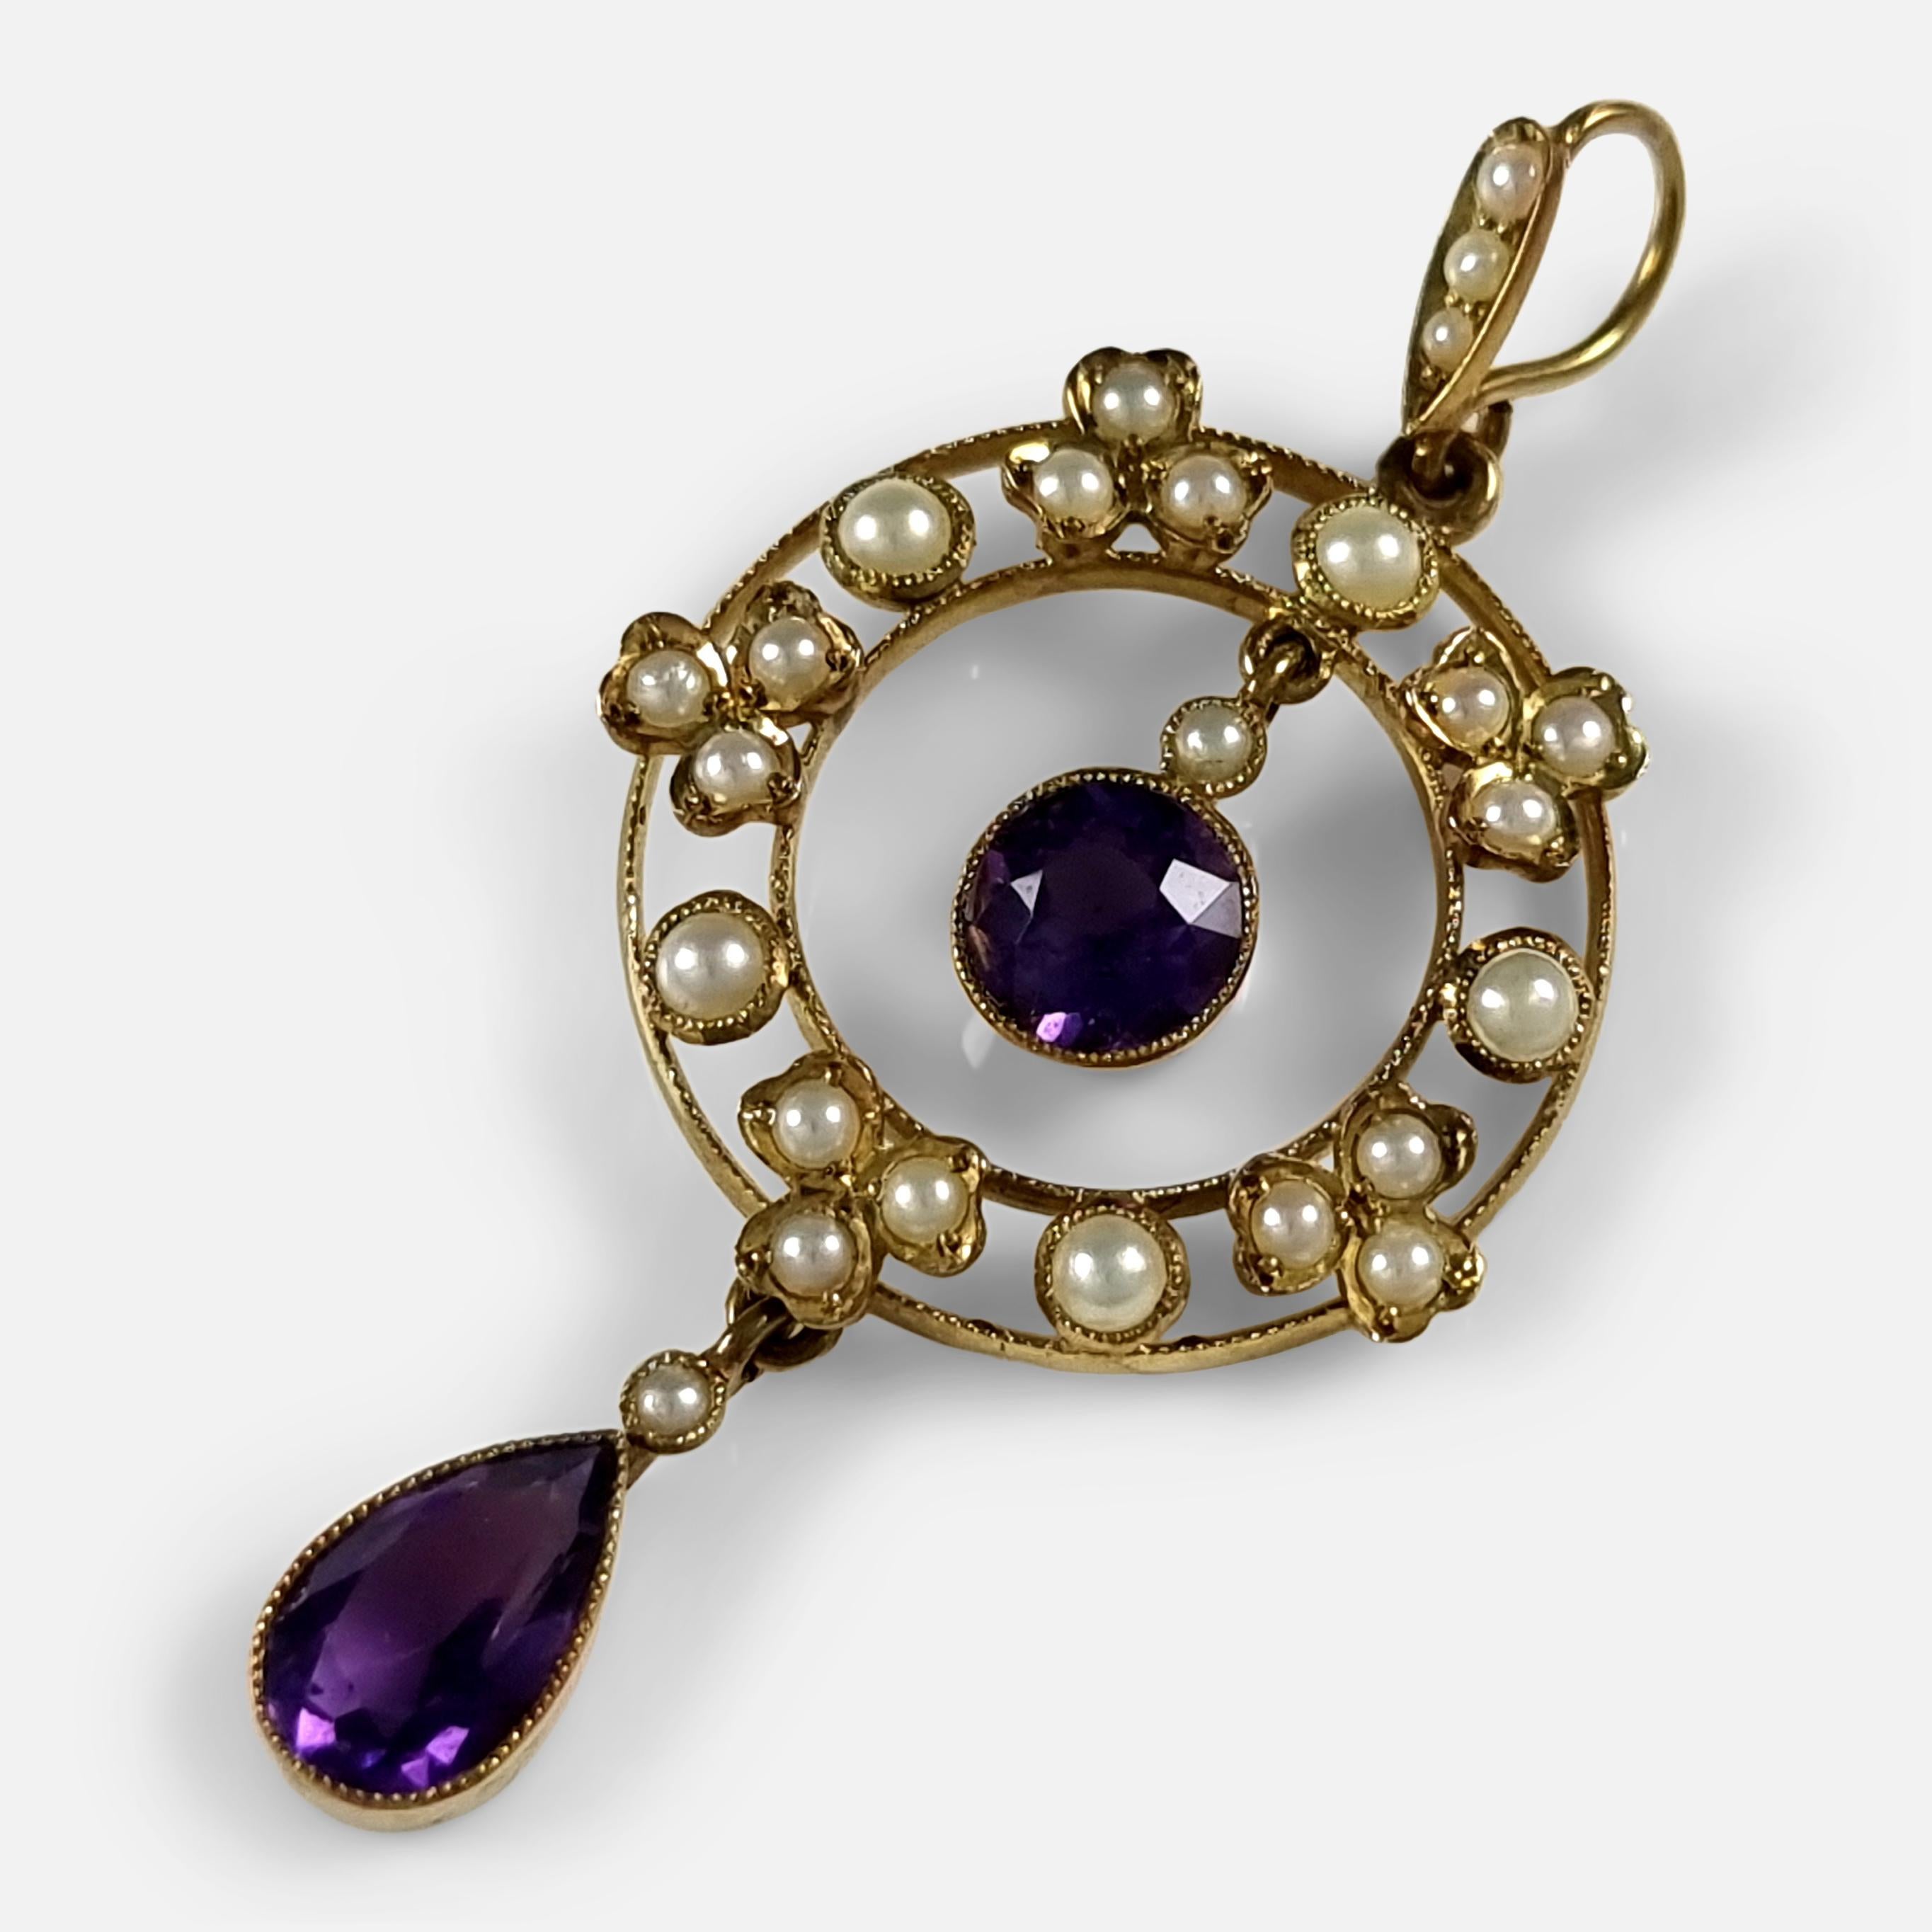 Edwardian 15ct Gold Amethyst and Seed Pearl Pendant For Sale 3